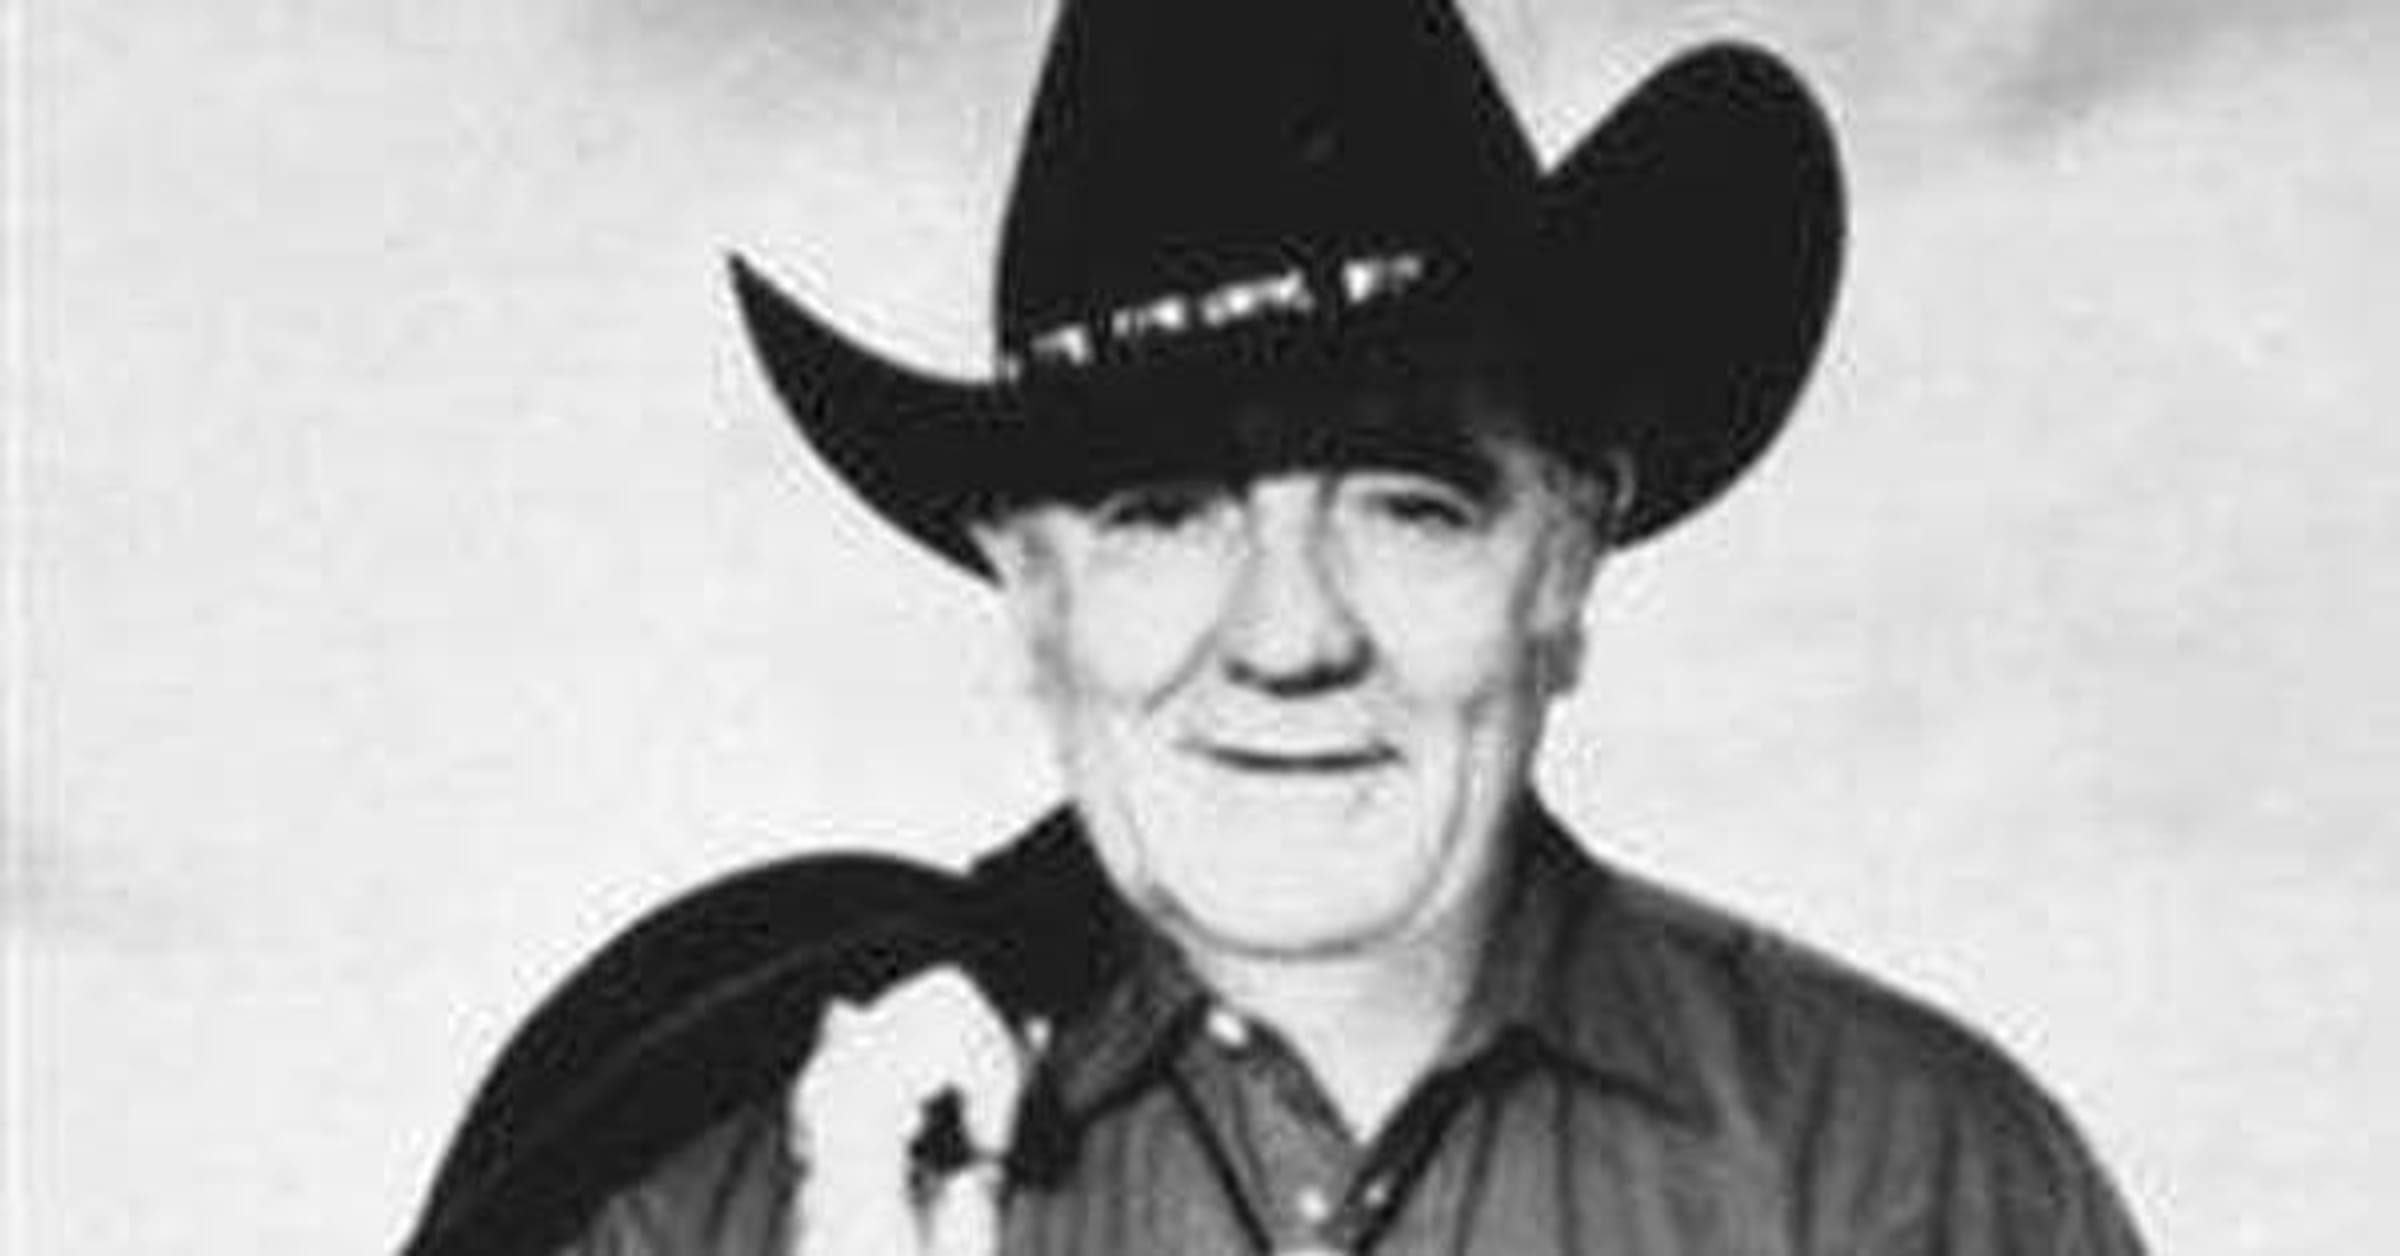 List of Books by Louis L'Amour